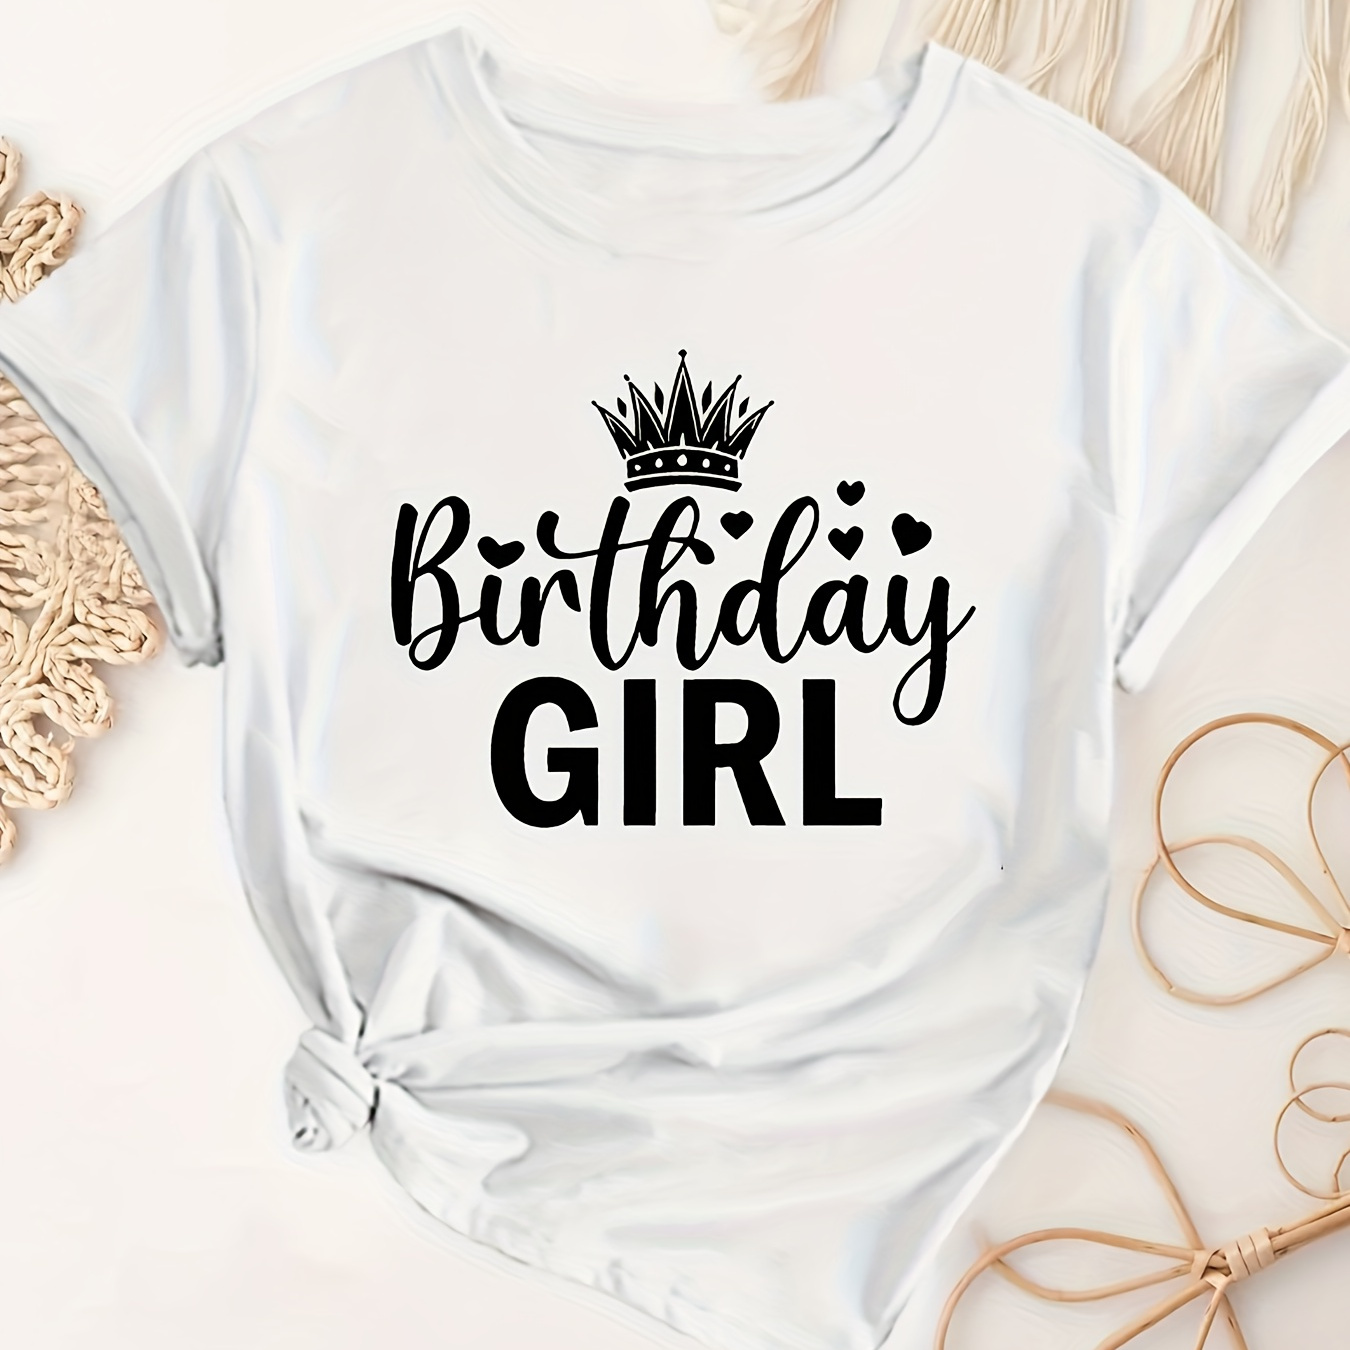 

Birthday Girl Print T-shirt, Short Sleeve Crew Neck Casual Top For Summer & Spring, Women's Clothing